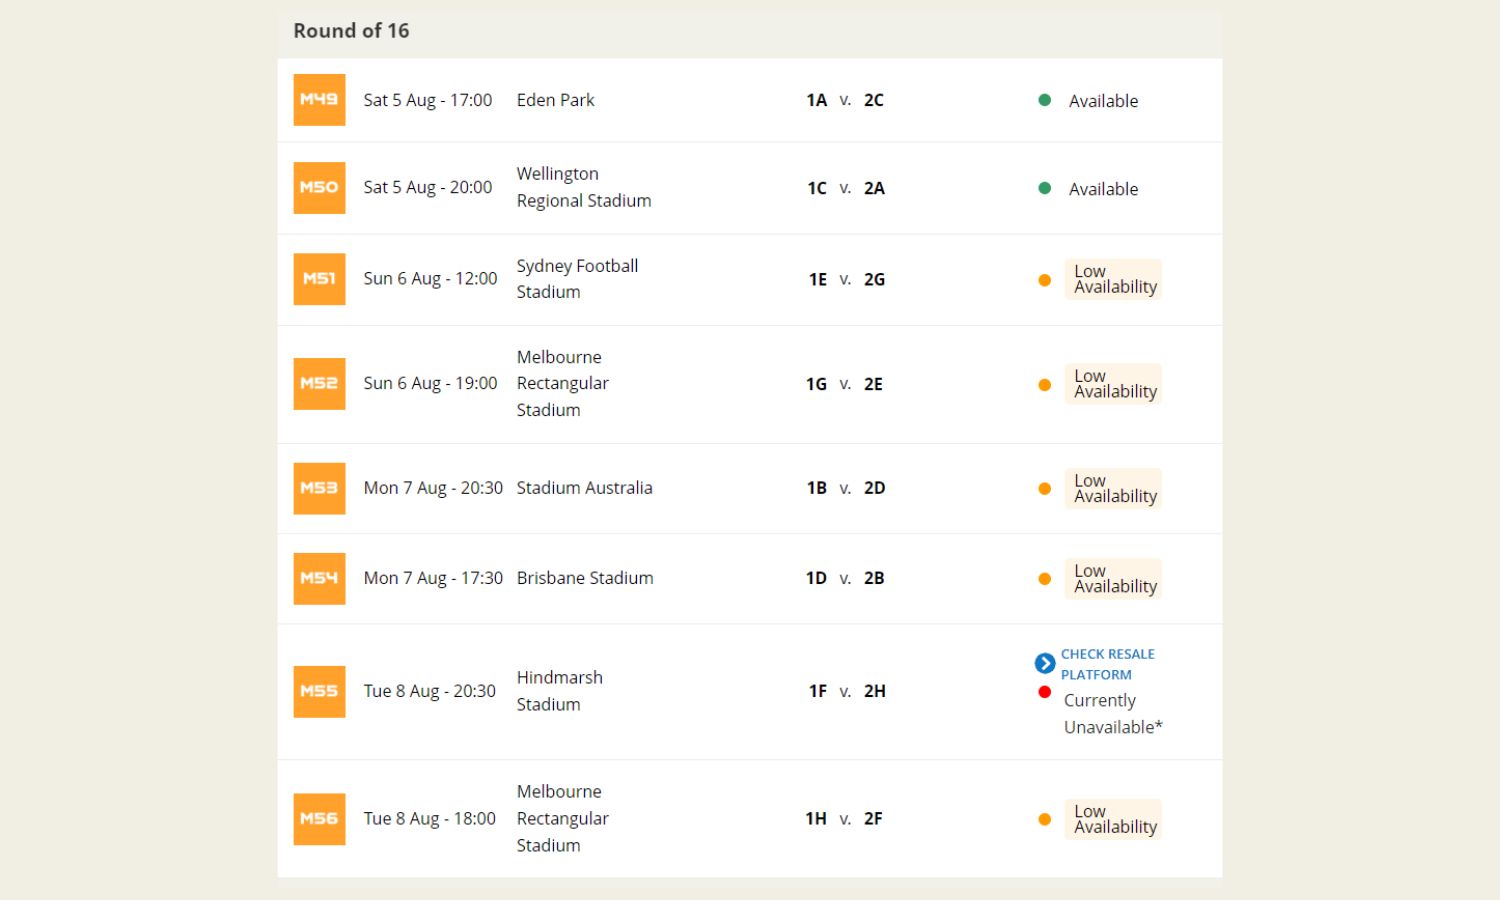 An image of the FIFA Official Ticketing site showing Round of 16 Games for the 2023 FIFA Women's World Cup